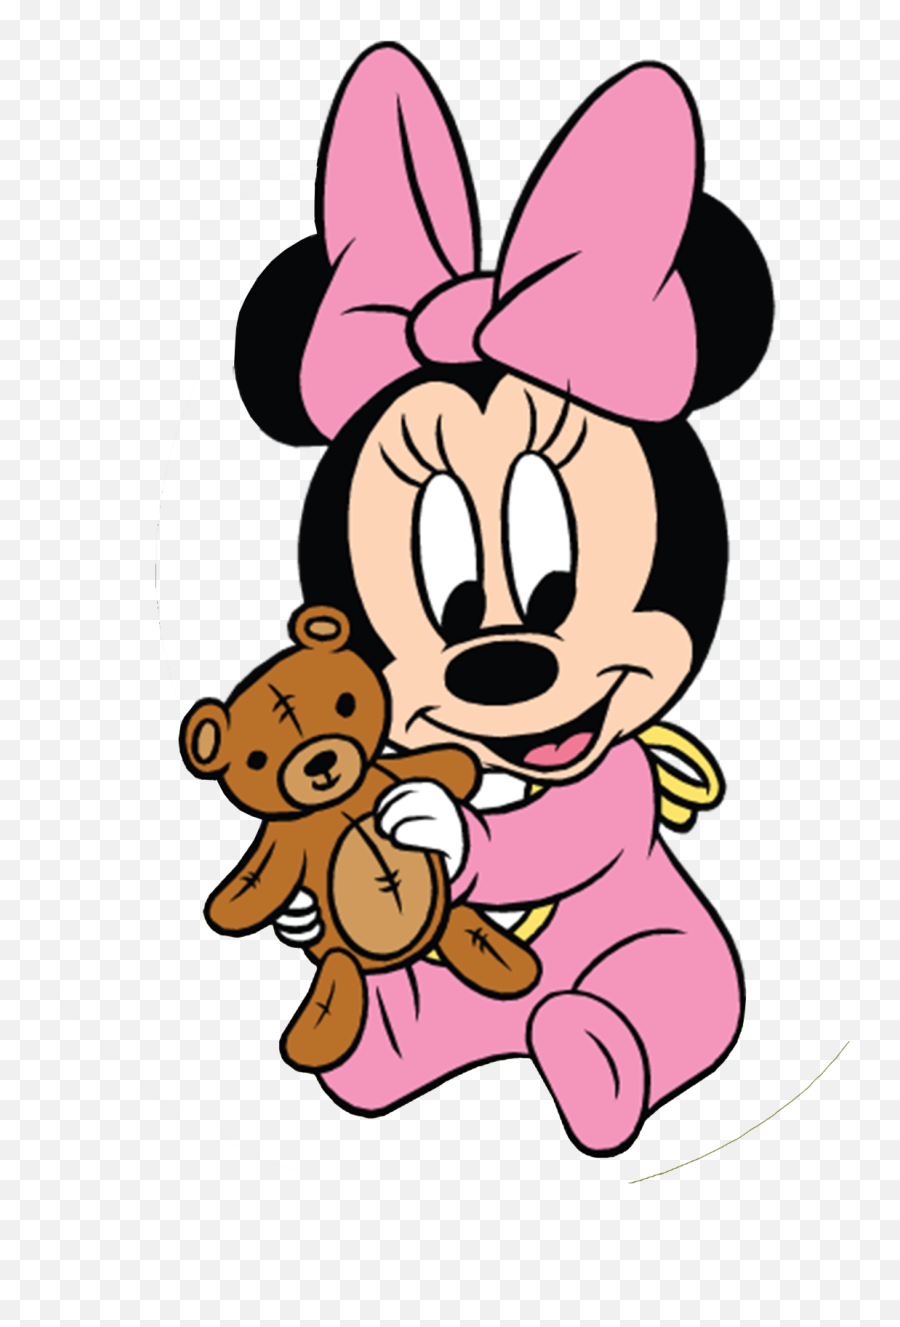 Minnie Mouse Png Free Download - Minnie Mouse De Bebe,Mouse Png